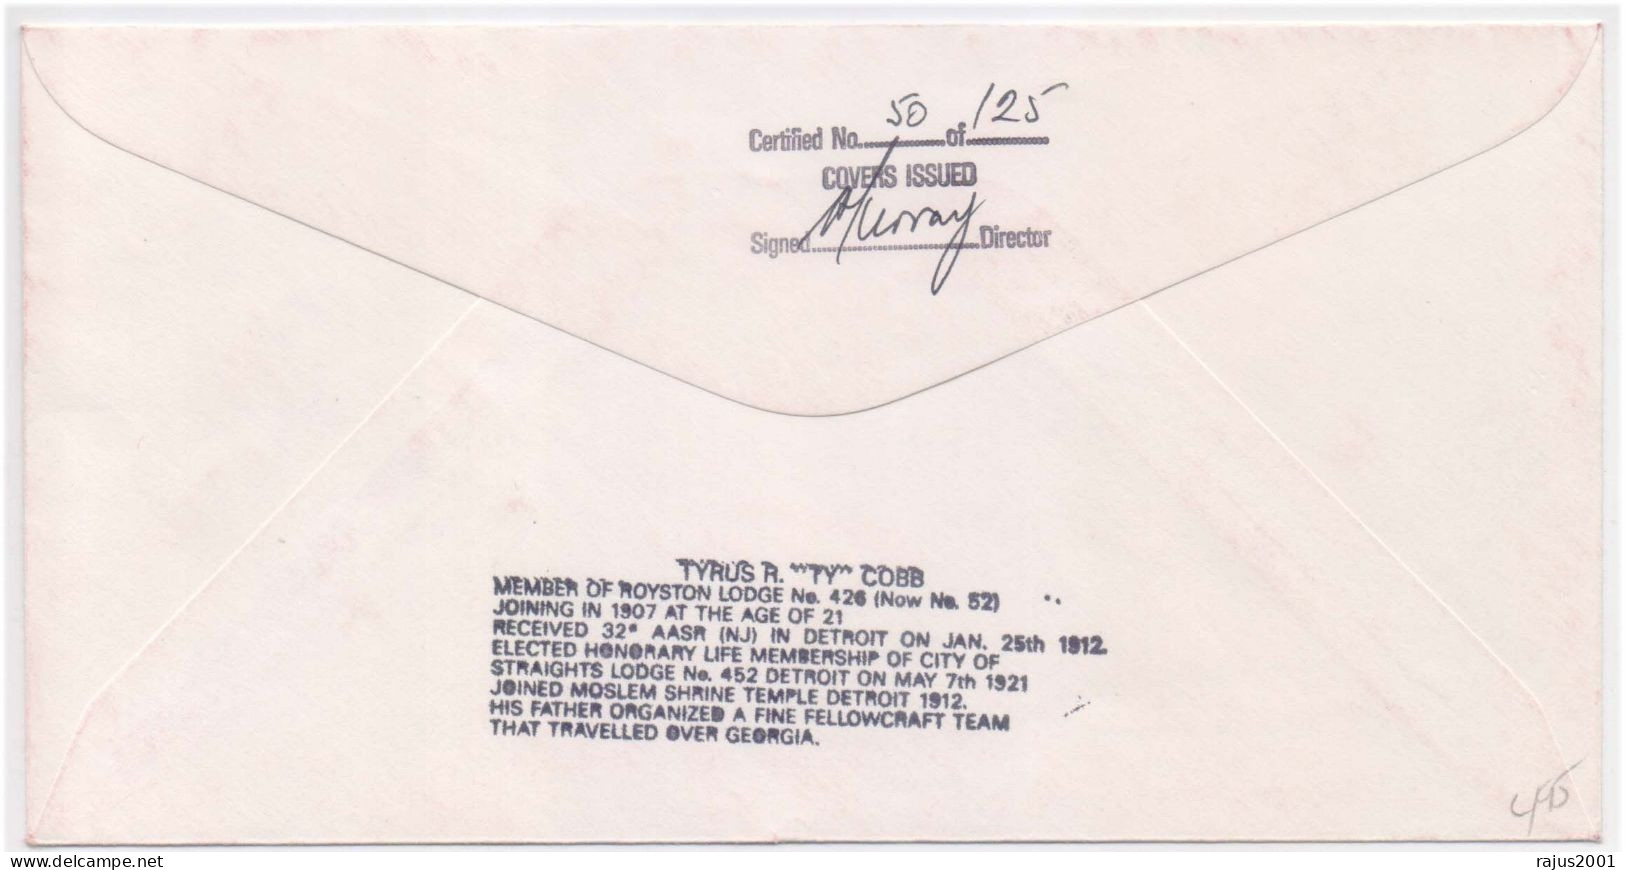 TYRUS R.TY COBB, MEMBER OF ROYSTON LODGE NO. 426, Baseball, Freemasonry Masonic, Only 125 Cover Issued Very Limited - Franc-Maçonnerie